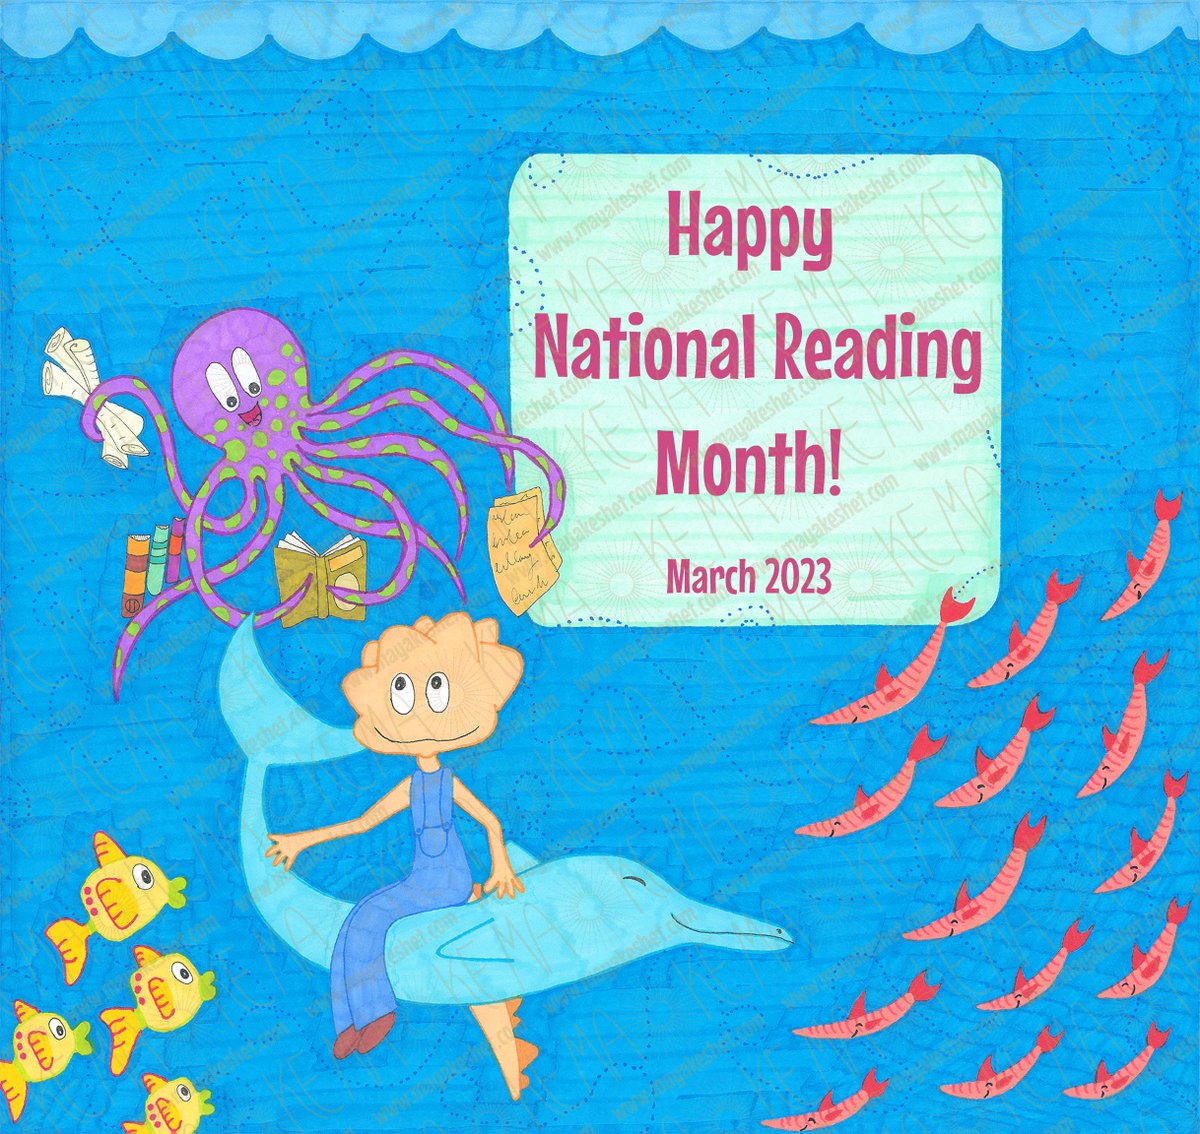 📚'The reading of all good books is like a conversation with the finest minds of past centuries.' - Rene Descartes.

March is #nationalreadingmonth.
Joyful #reading to you all, from all of us in MA☀️KE.

#IamAReader #books #Book #youngreaders #Childrenbooks #readingforpleasure